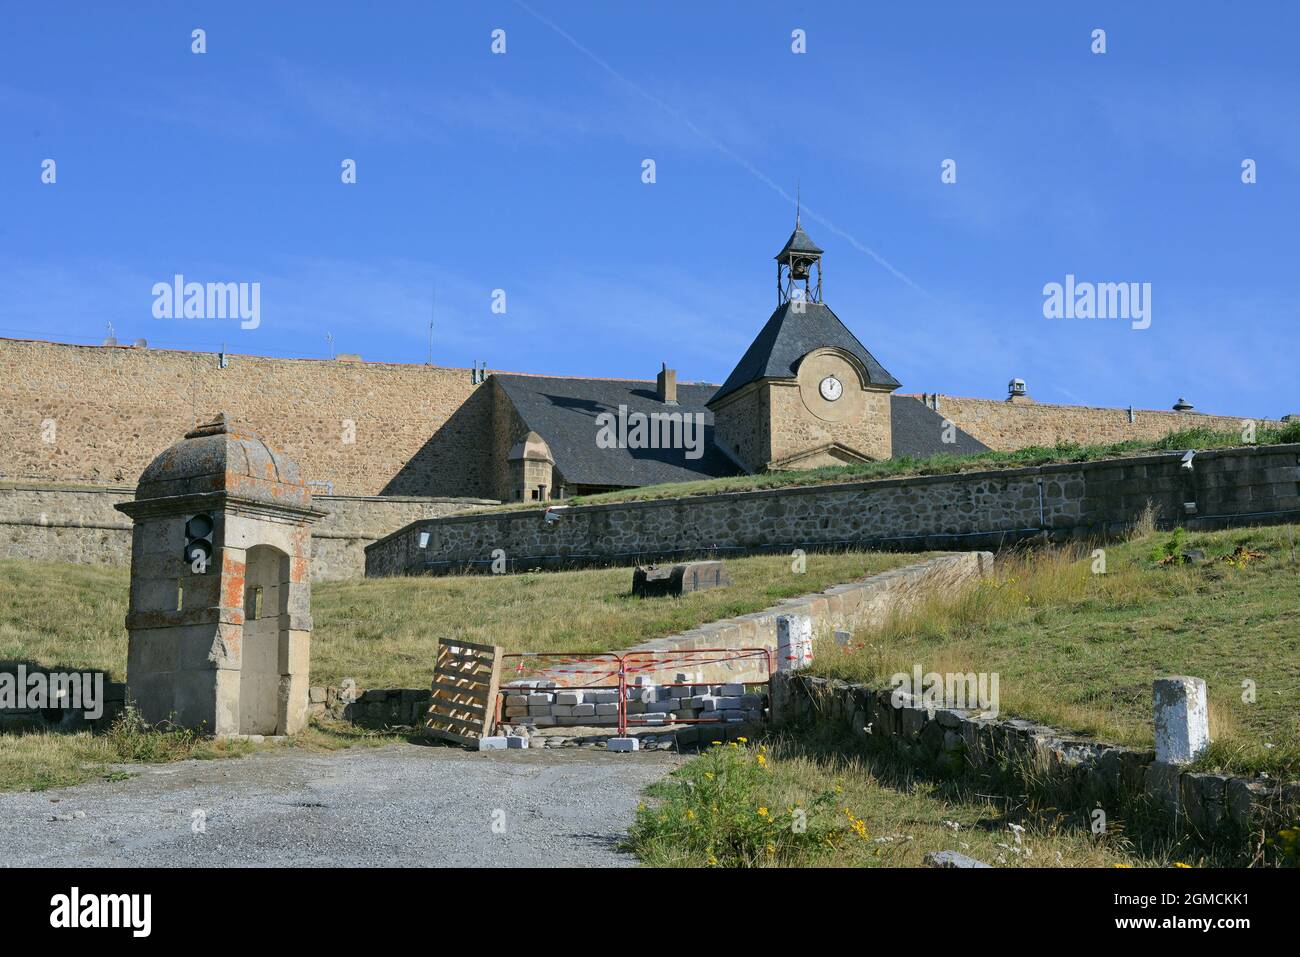 Mont-Louis a UNESCO World Heritage Site located in the department of Pyrenees-Orientales in the Occitania region, France Stock Photo